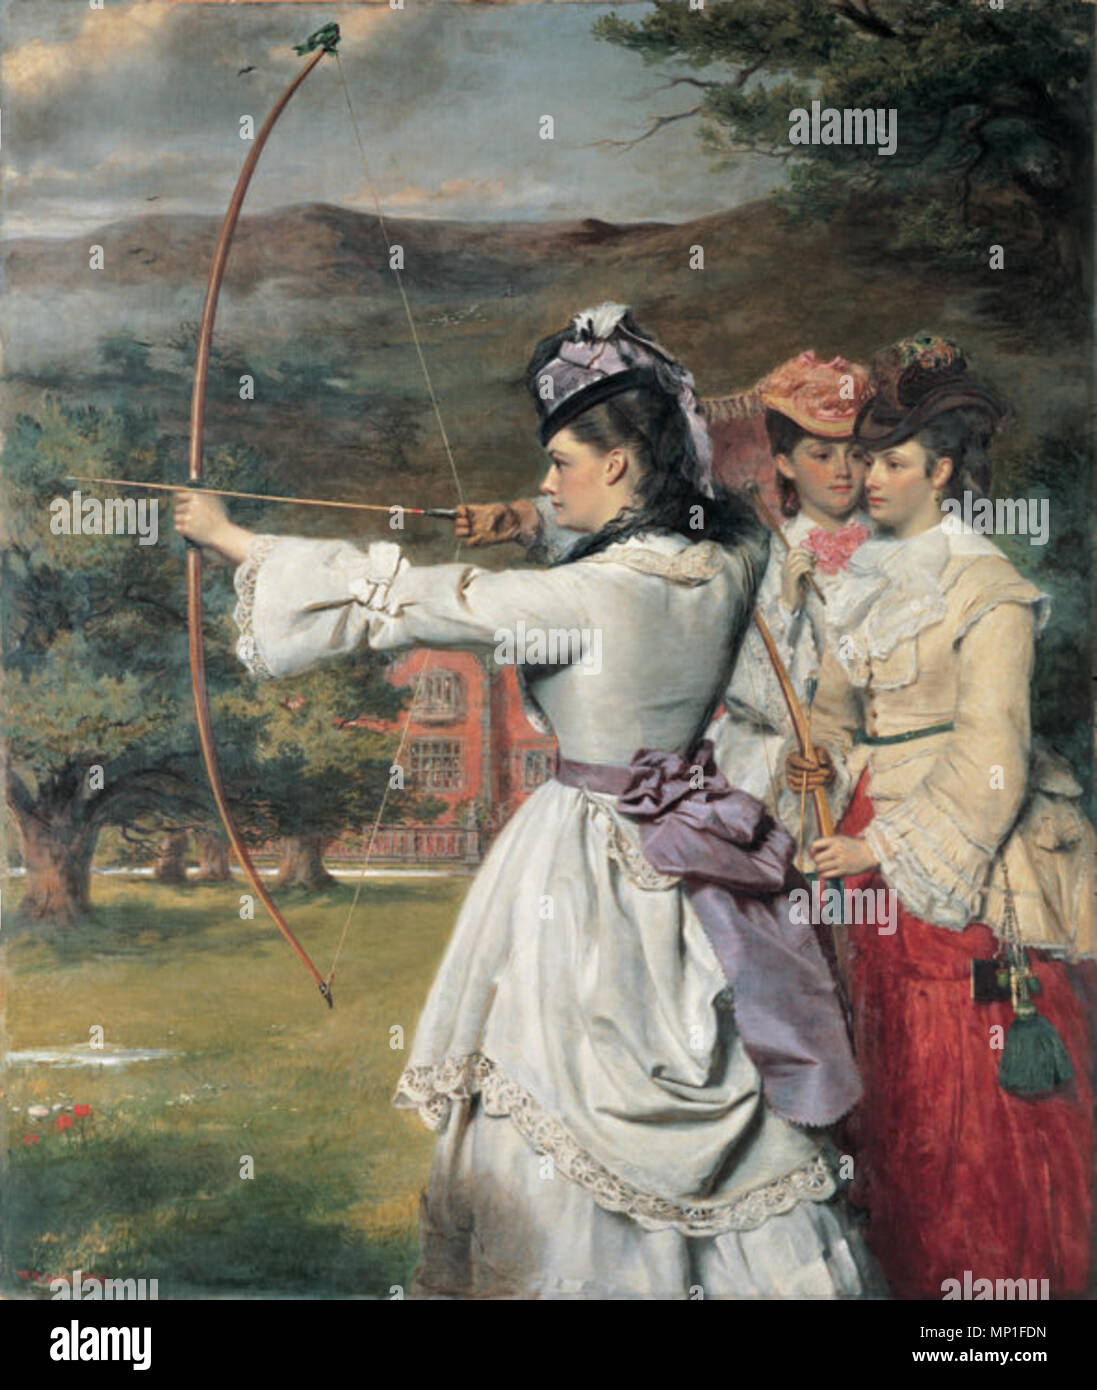 .  English: The Fair Toxophiles. Painting. Royal Albert Memorial Museum, UK. (Archery was one of the few competitive athletic activities that women of the middle and upper classes could respectably participate in.) . 1872.    William Powell Frith  (1819–1909)     Alternative names W. P. Frith; William Frith; Frith; r.a. w.p. frith; w. frith; W.P. Frith; w.p. frith  Description English painter  Date of birth/death 19 January 1819 9 November 1909  Location of birth/death Aldfield, North Yorkshire, England London  Authority control  : Q955750 VIAF: 77118105 ISNI: 0000 0001 0815 124X ULAN: 5000099 Stock Photo